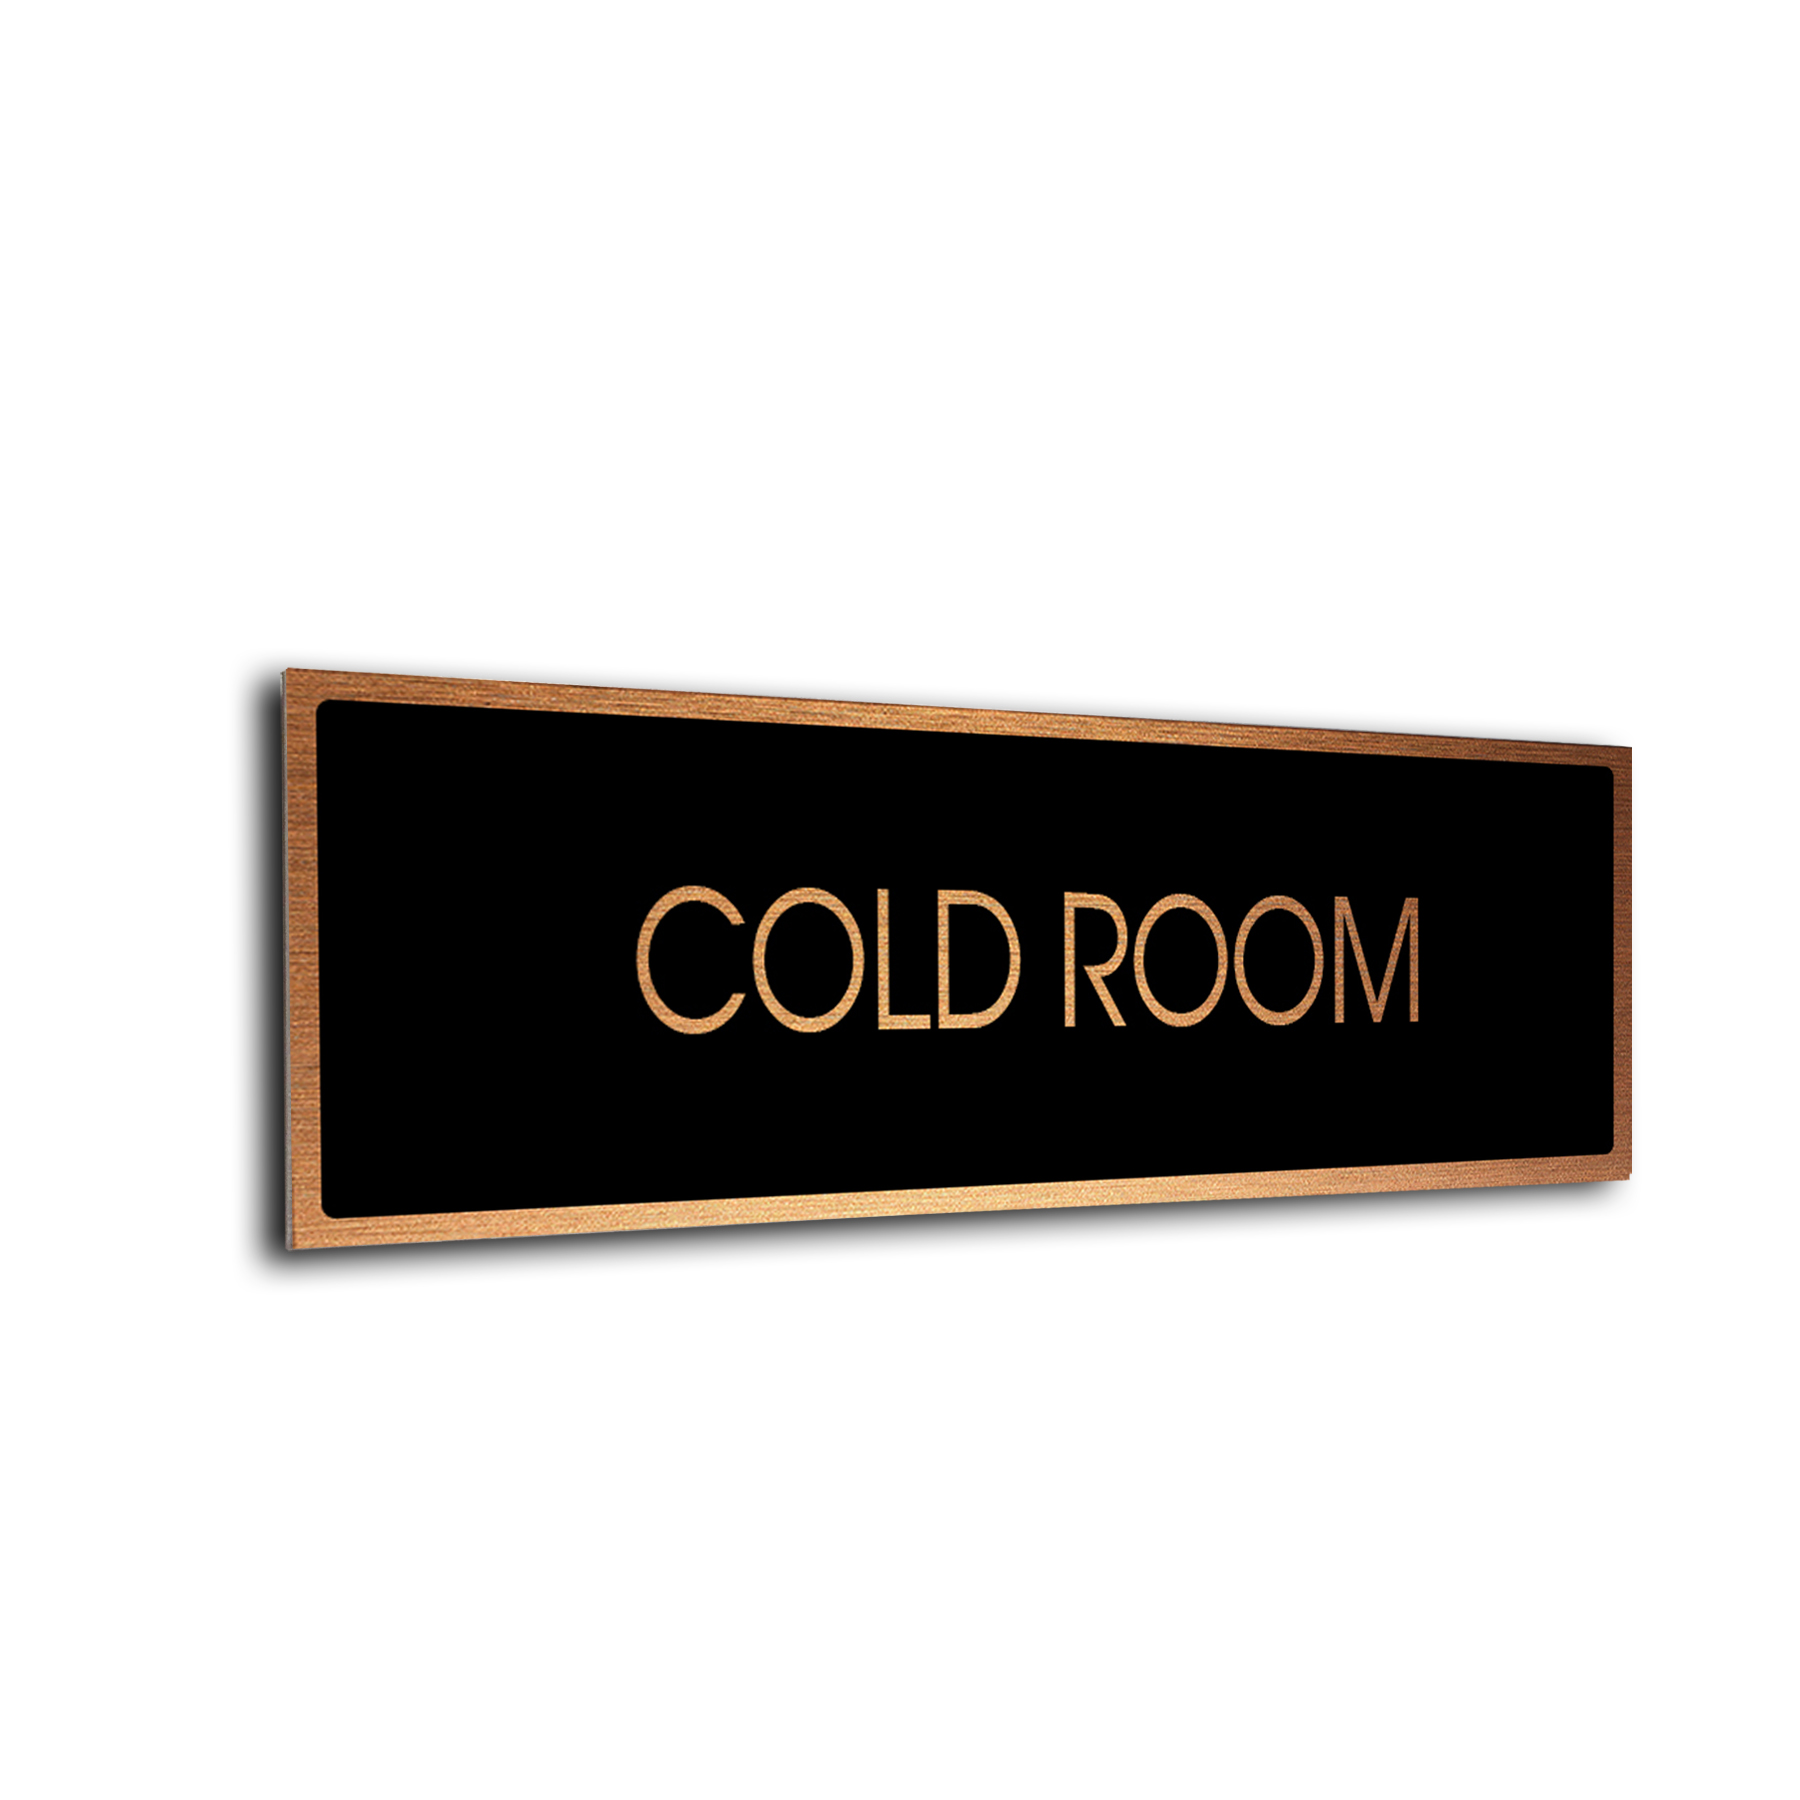 Cold Room Door Sign. Clearly label every room in your facility